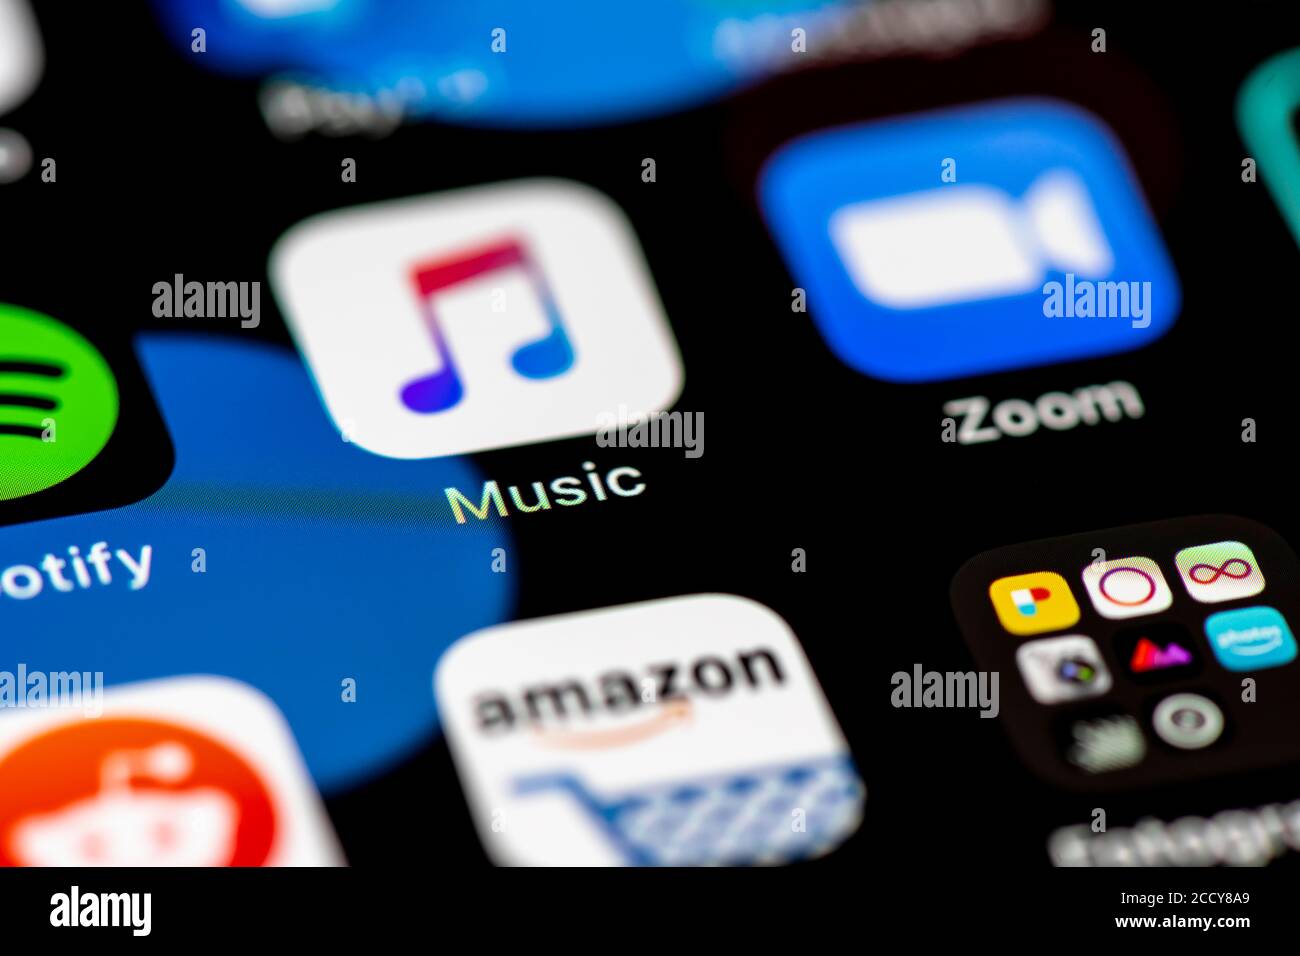 Apple Music, App Icons on a mobile phone Display, iPhone, Smartphone, close-up, full screen Stock Photo